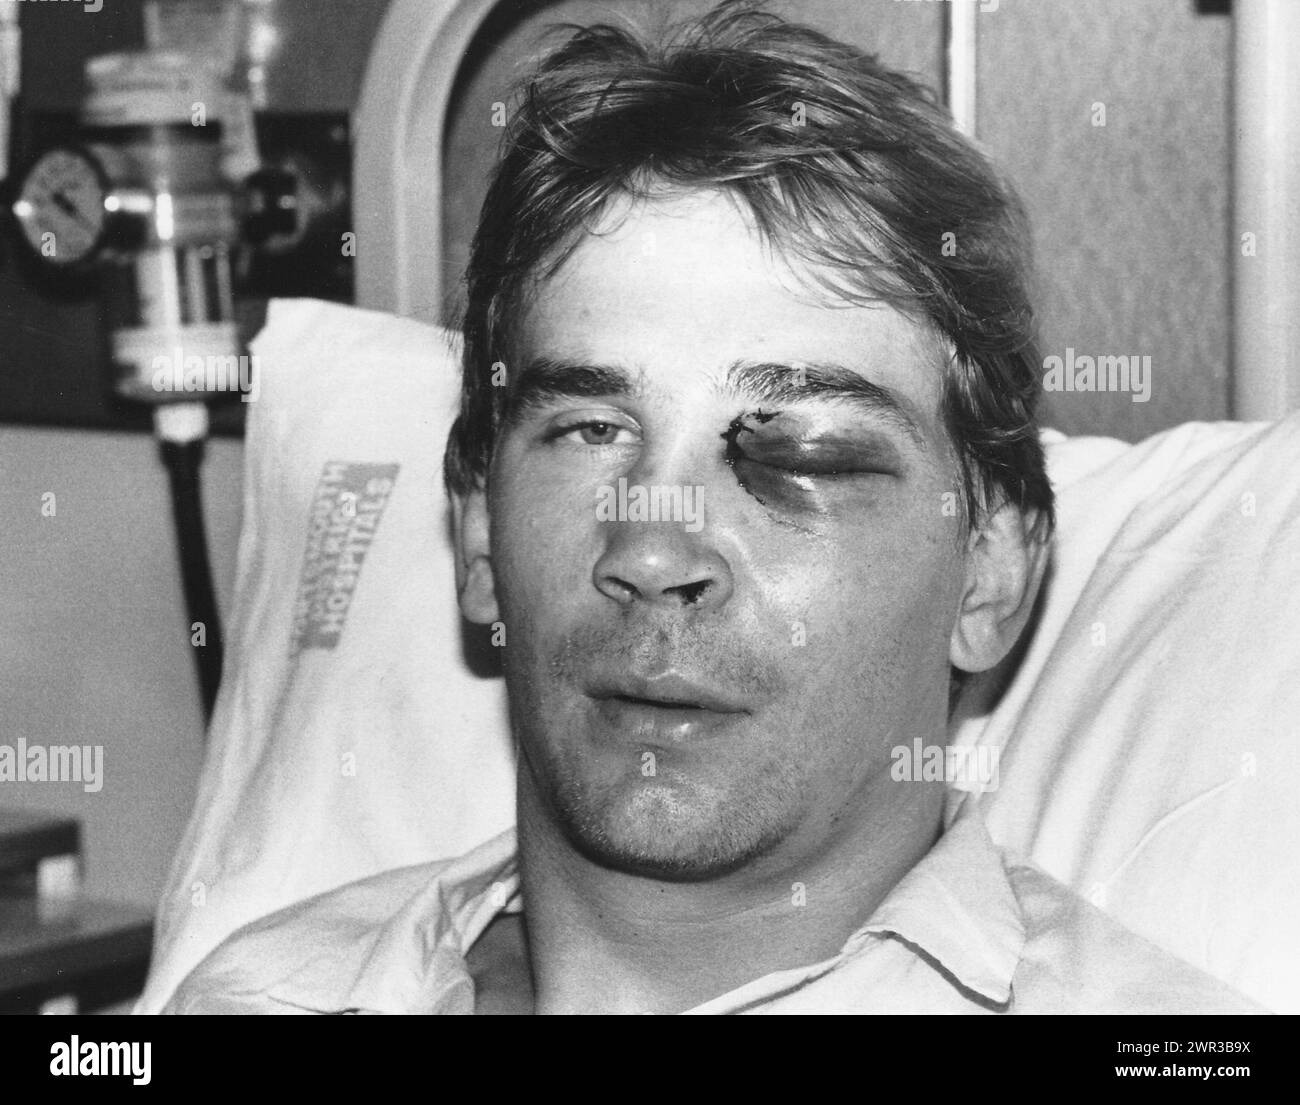 POMPEY GOALKEEPER ALAN KNIGHT IN HOSPITAL AFTER SUFFERING A FRACTURED CHEEK BONE AT WIMBLEDON, 1988 PIC MIKE WALKER 1988 Stock Photo